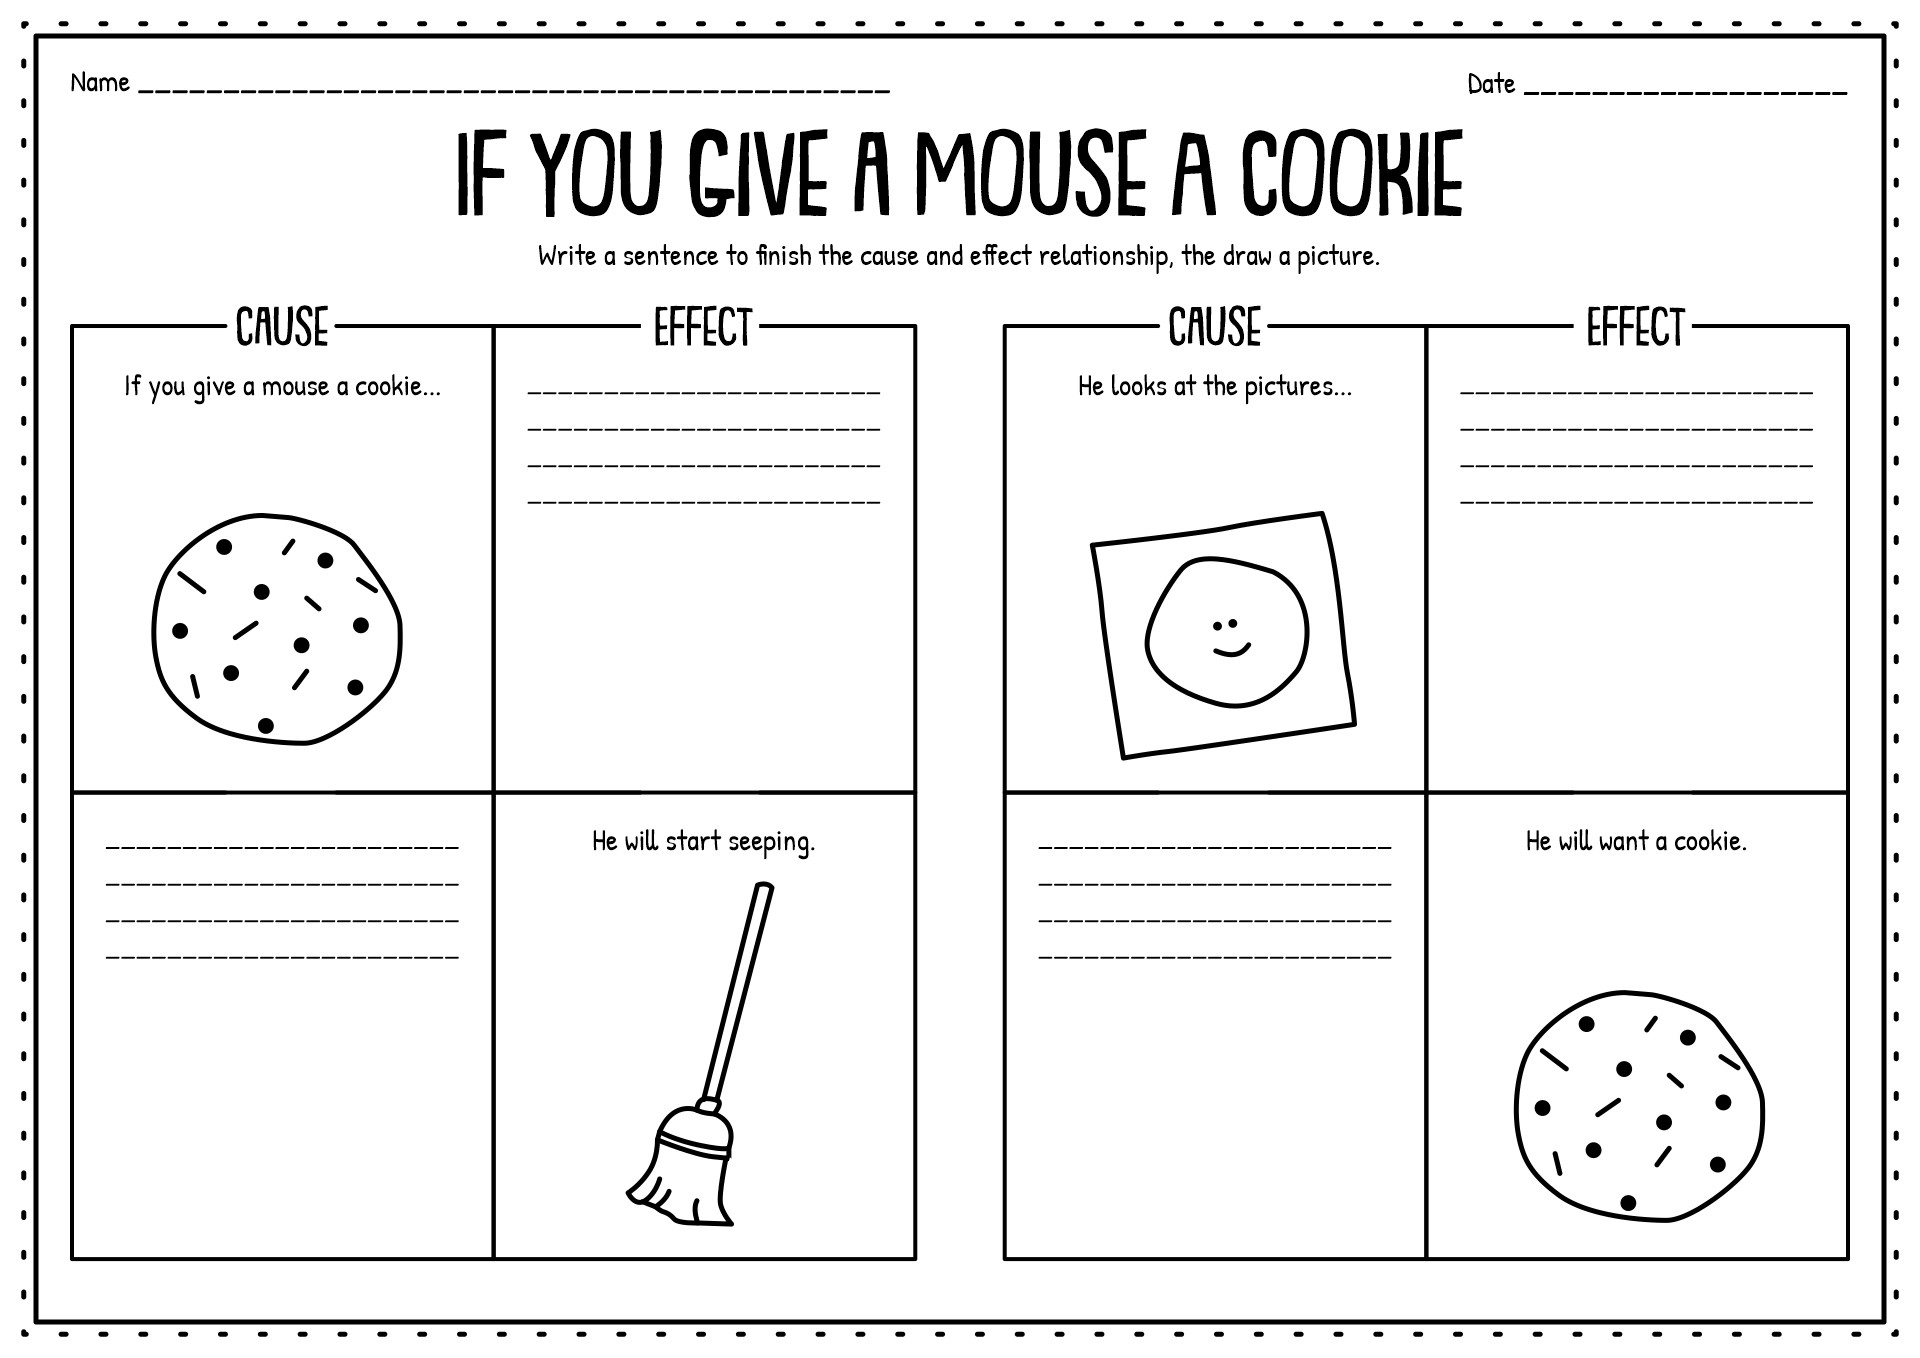 If You Give a Mouse a Cookie Story